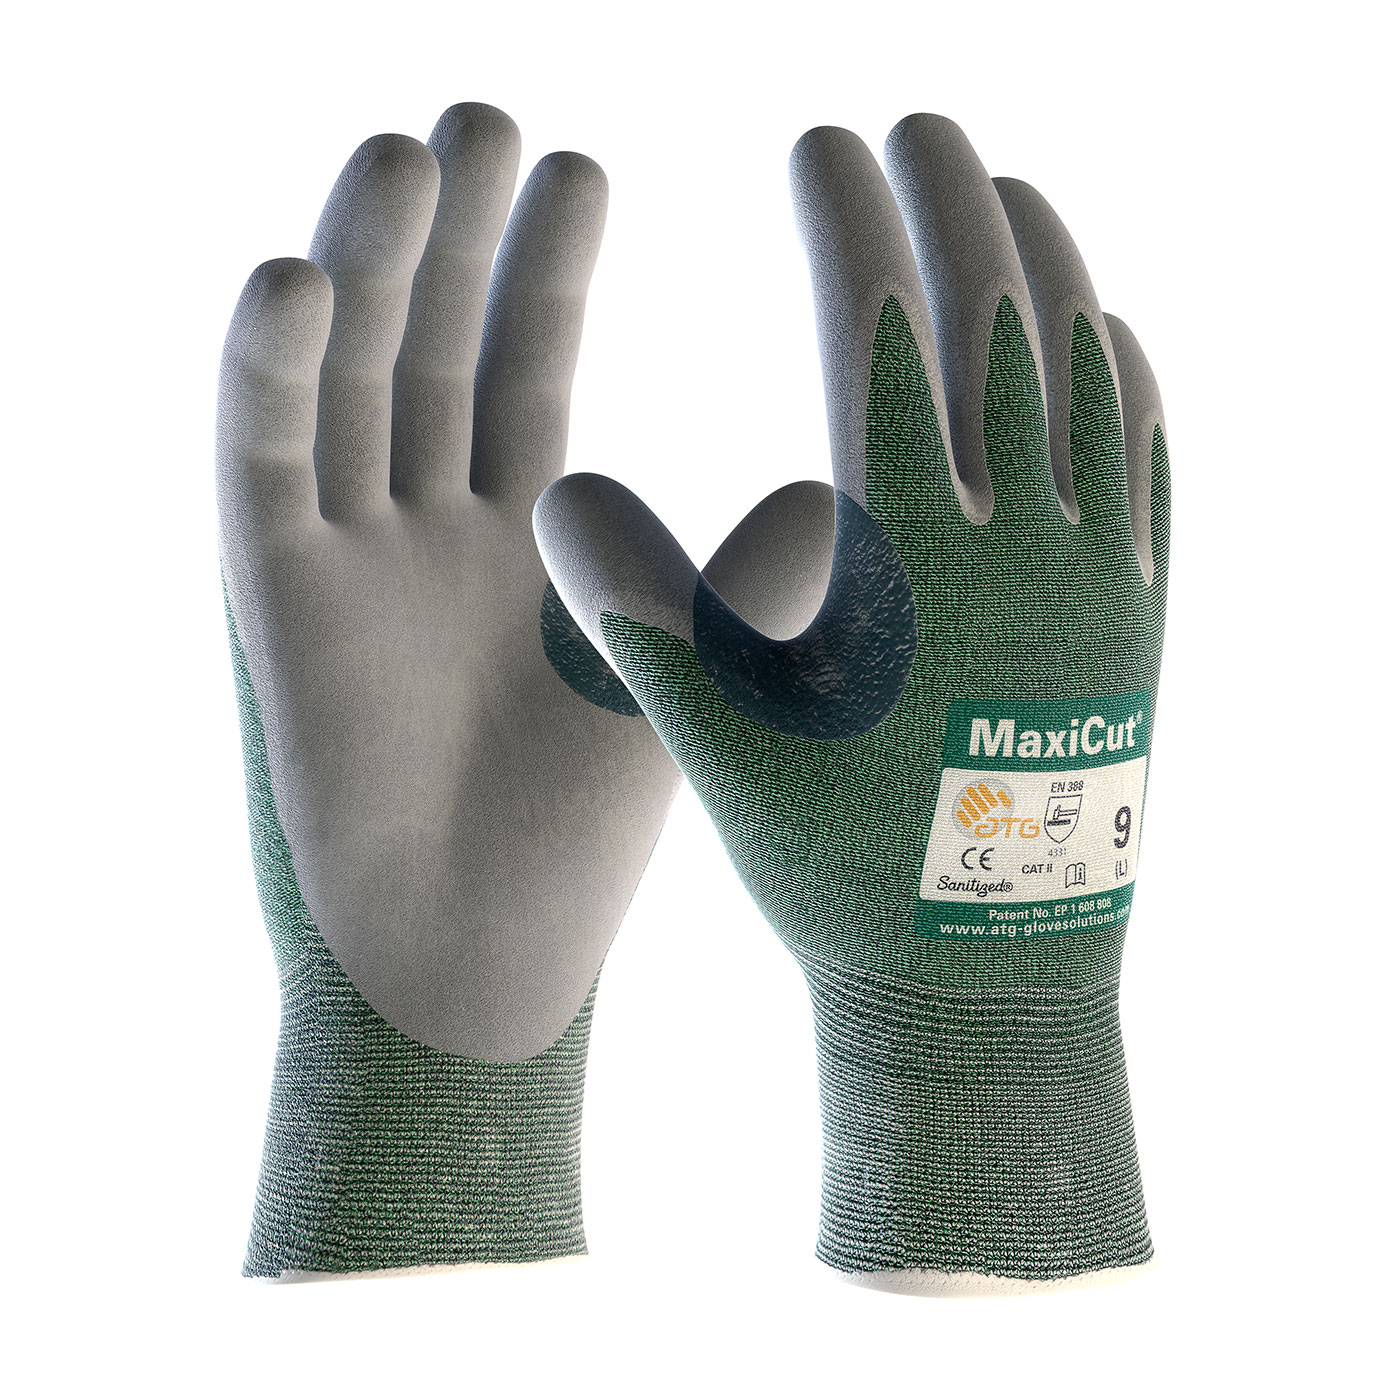 PIP 18-570/XL MaxiCut Seamless Knit Engineered Yarn Glove with Nitrile Coated MicroFoam Grip on Palm & Fingers - X-Large PID-18570XL